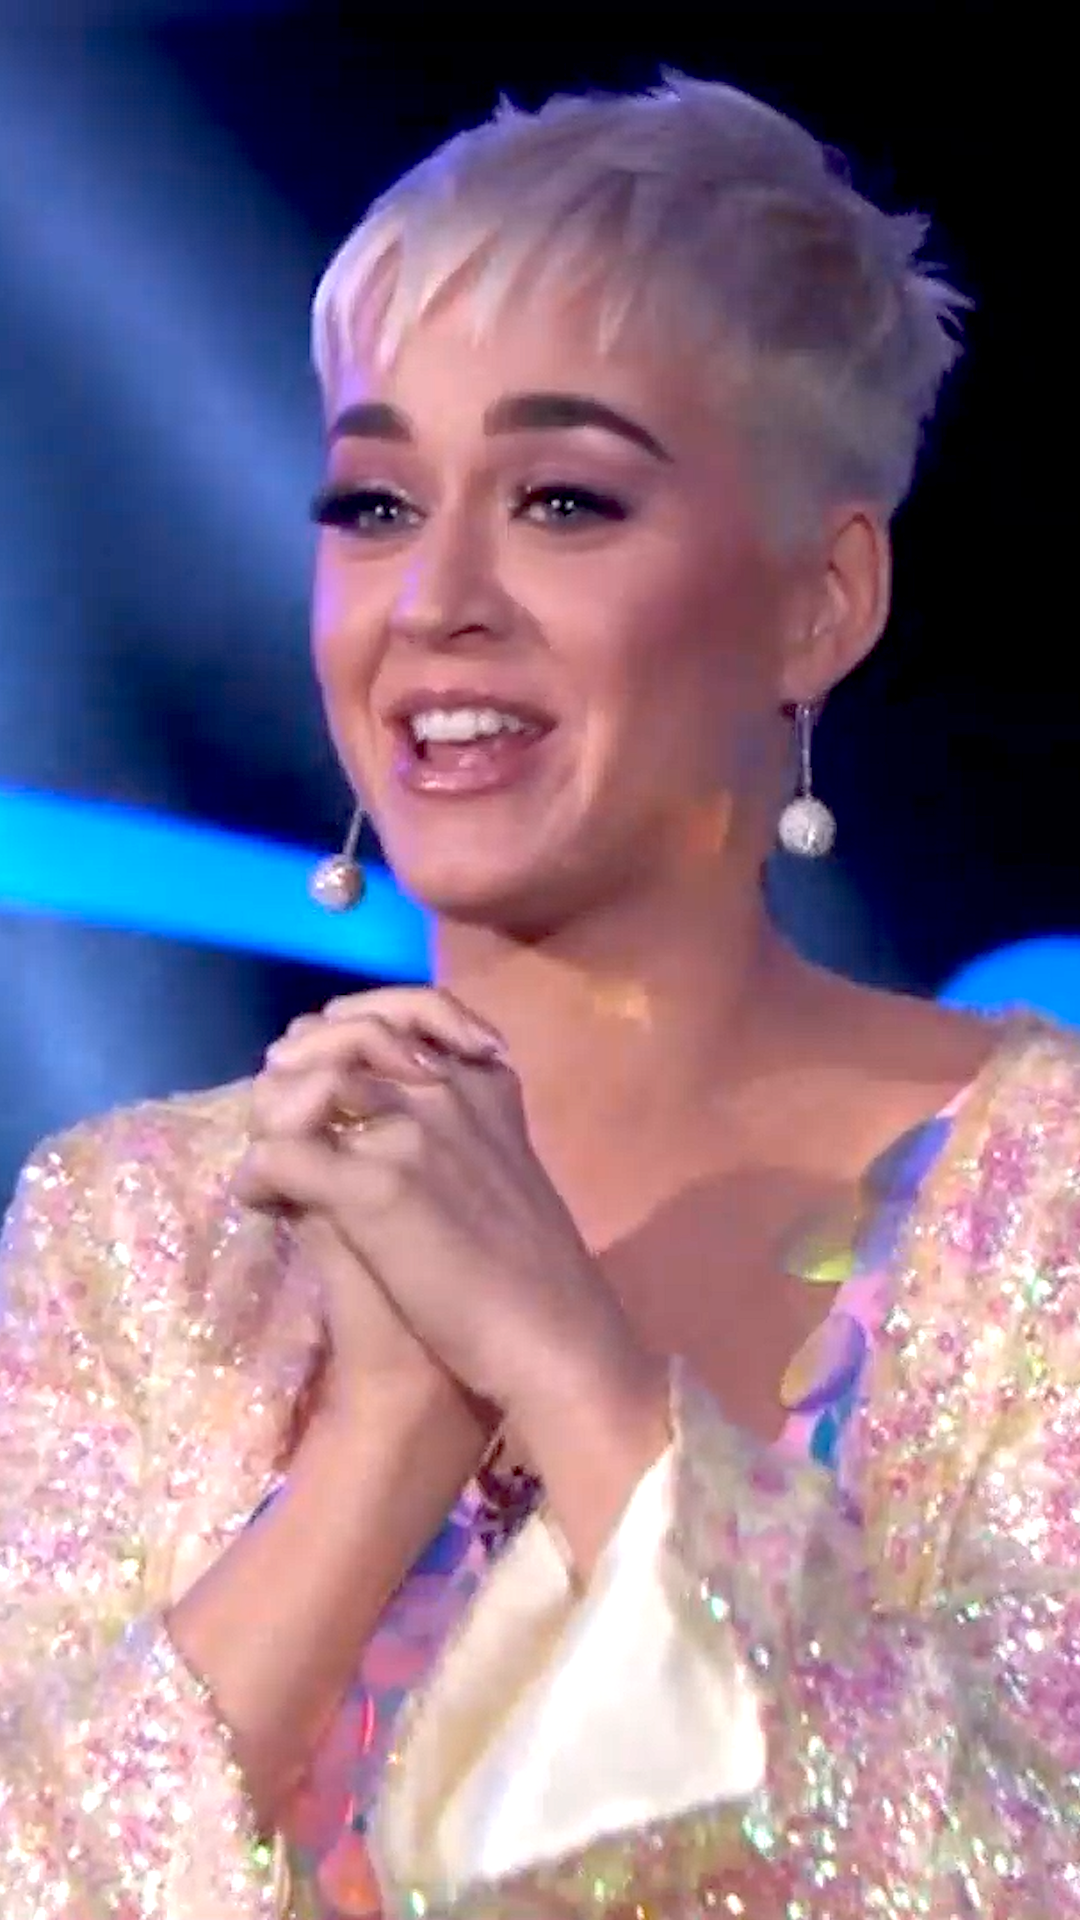 Katy Perry finds another new crush on ‘American Idol’ [Video]